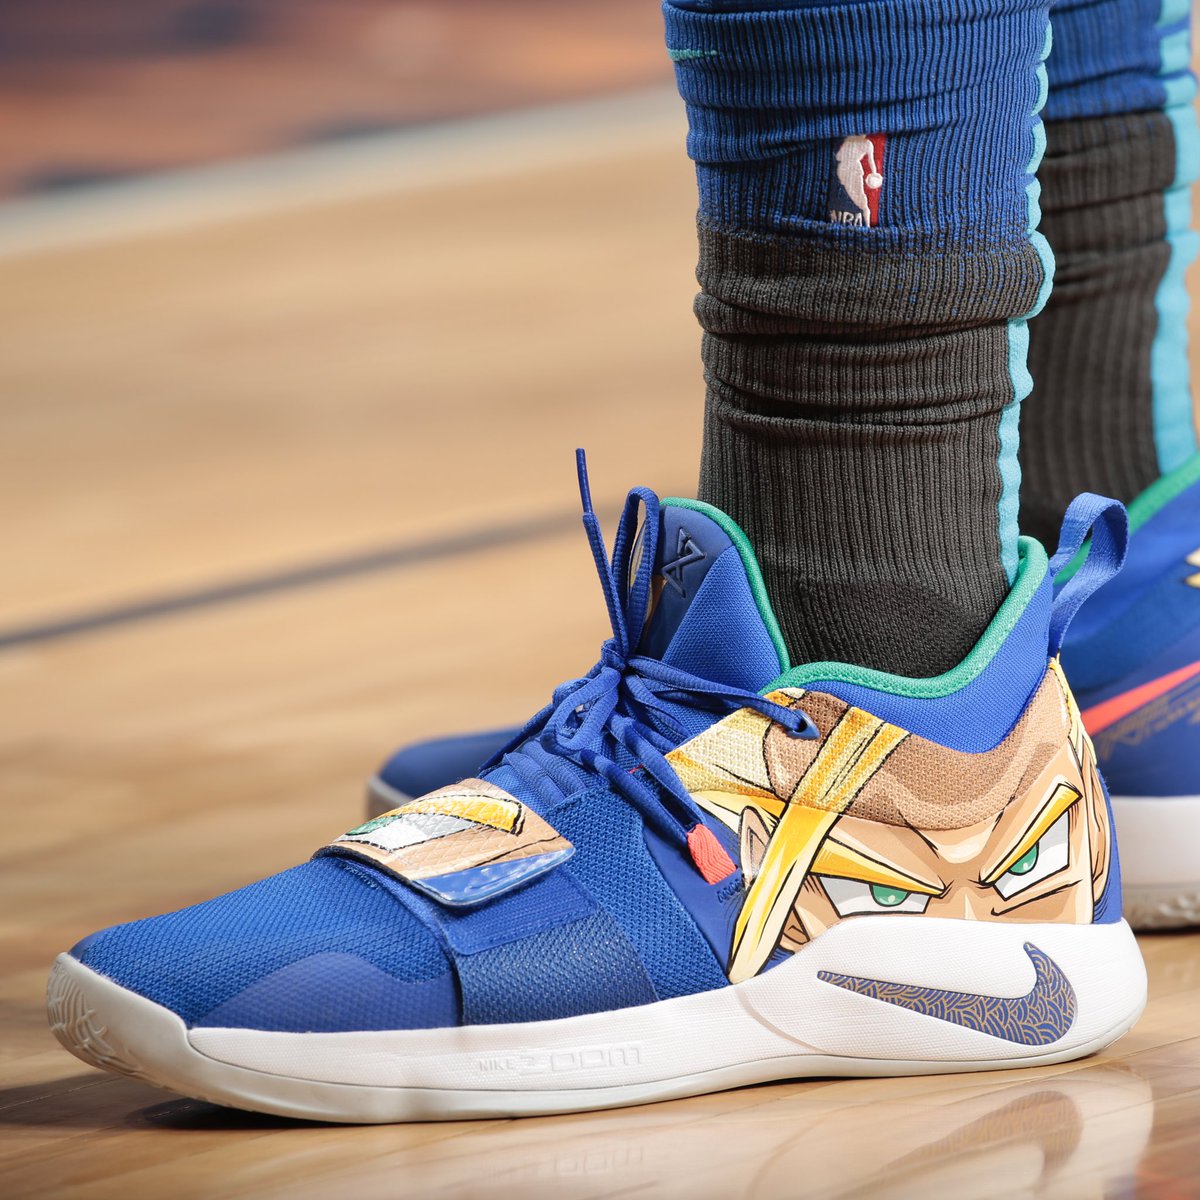 SoleCollector.com on Twitter: @luka7doncic in his “Gohan” Nike PG 2.5 customs 📸: Glenn James https://t.co/aacuVnAFh6" Twitter